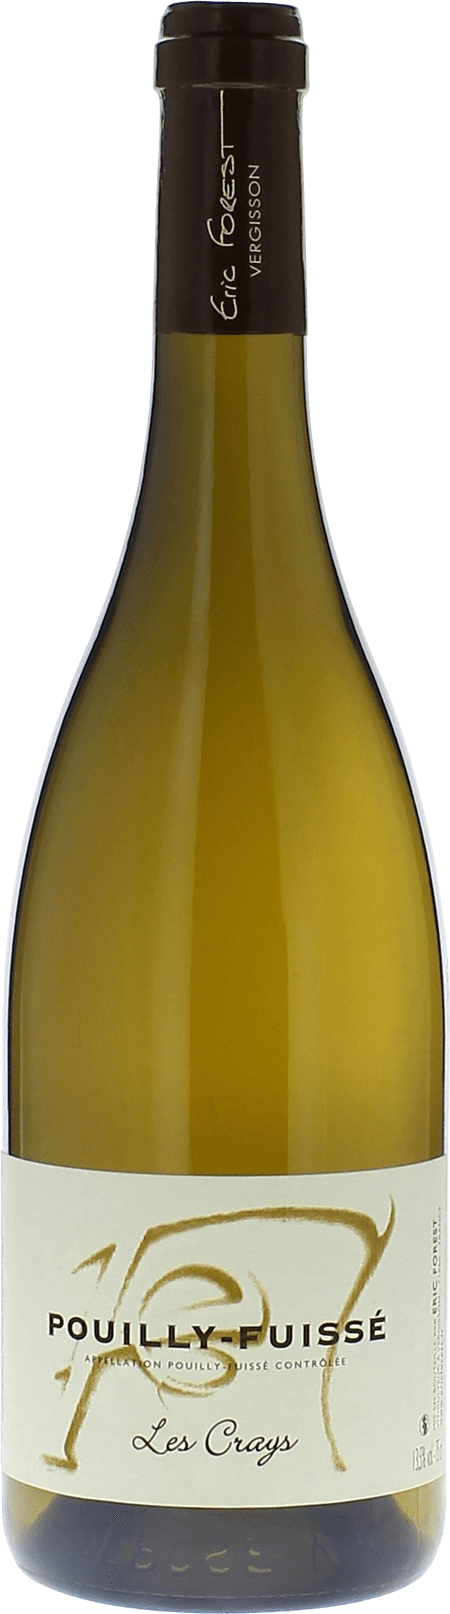 Pouilly fuiss les crays 2015 Domaine Eric Forest, Bourgogne blanc